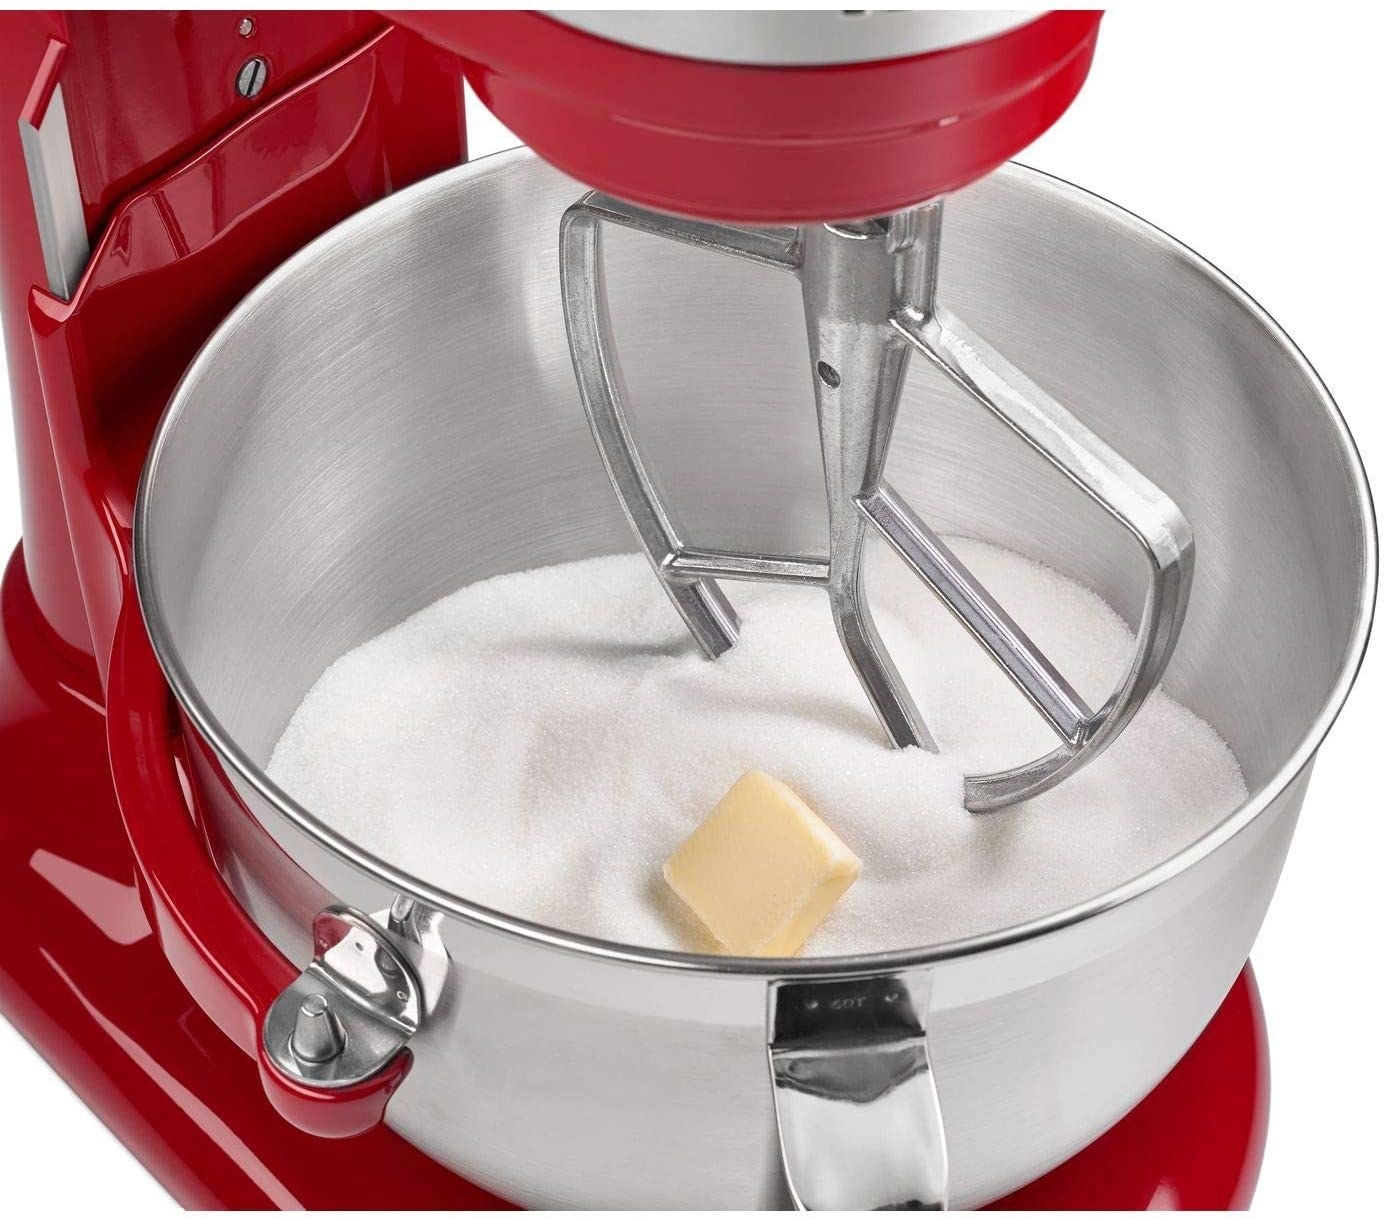 The mixer with sugar and butter in it